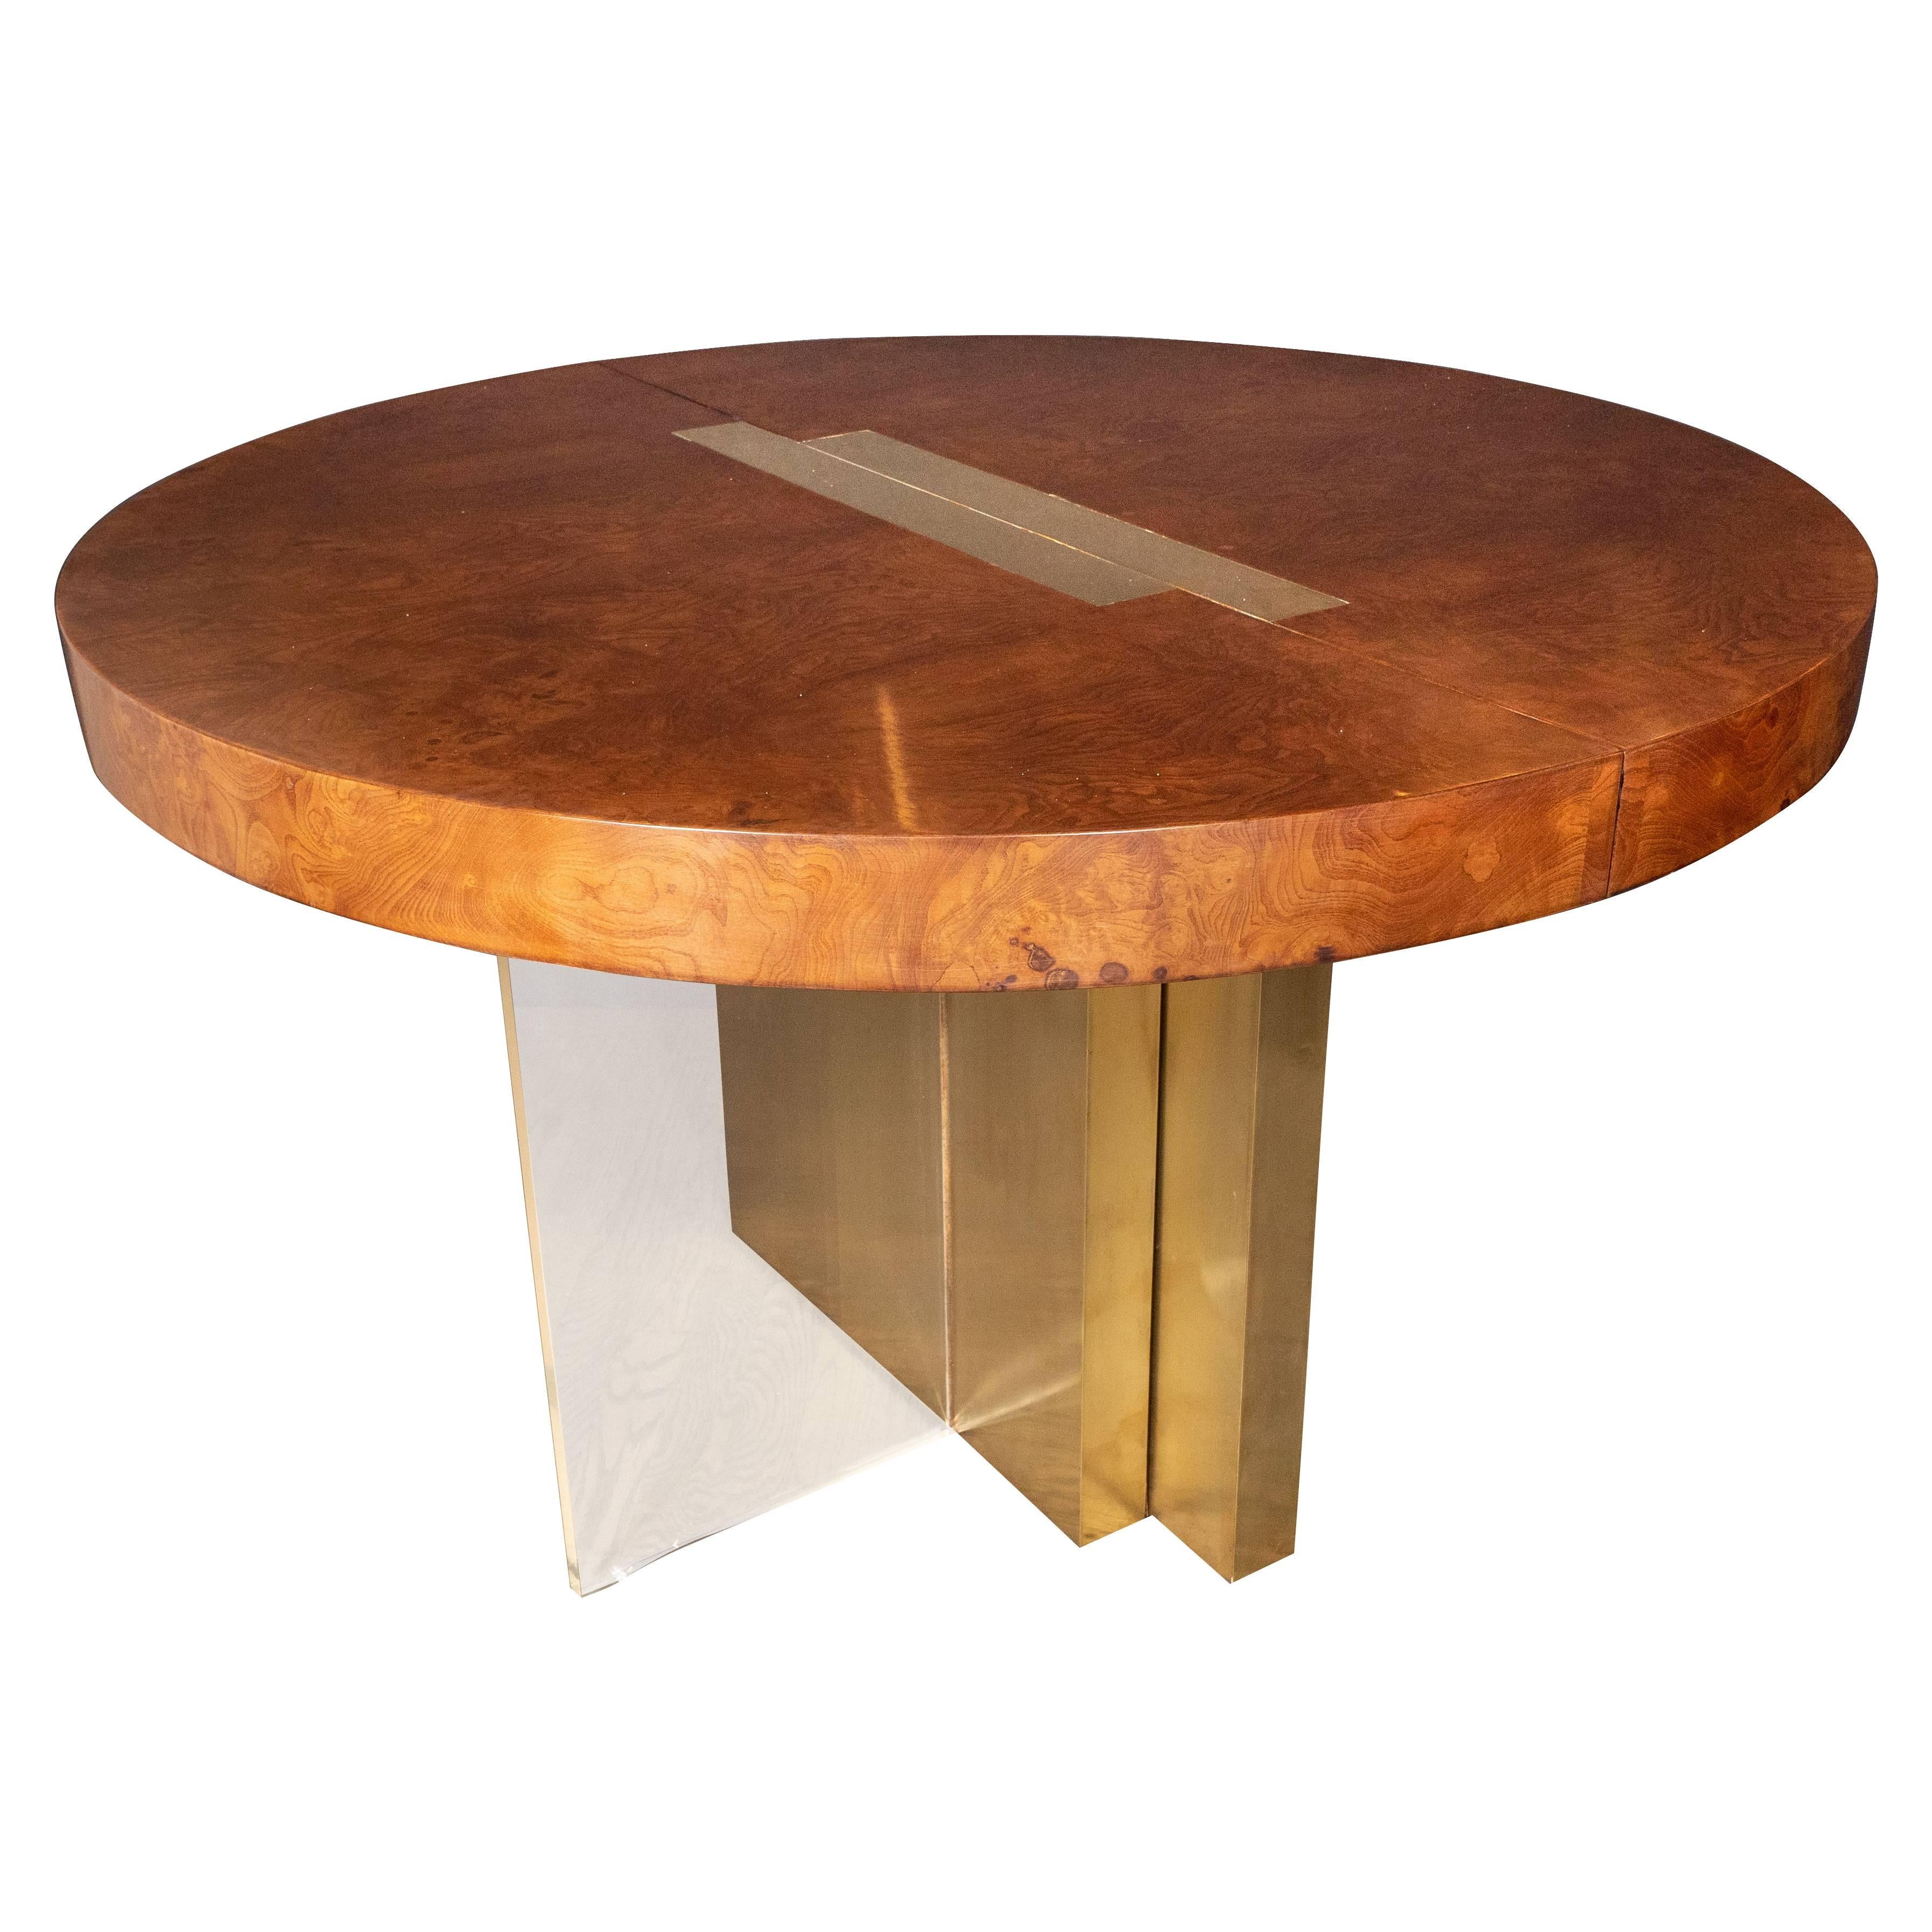 Midcentury Burled Ash, Brass and Lucite Center/Dining Table by Vladimir Kagan